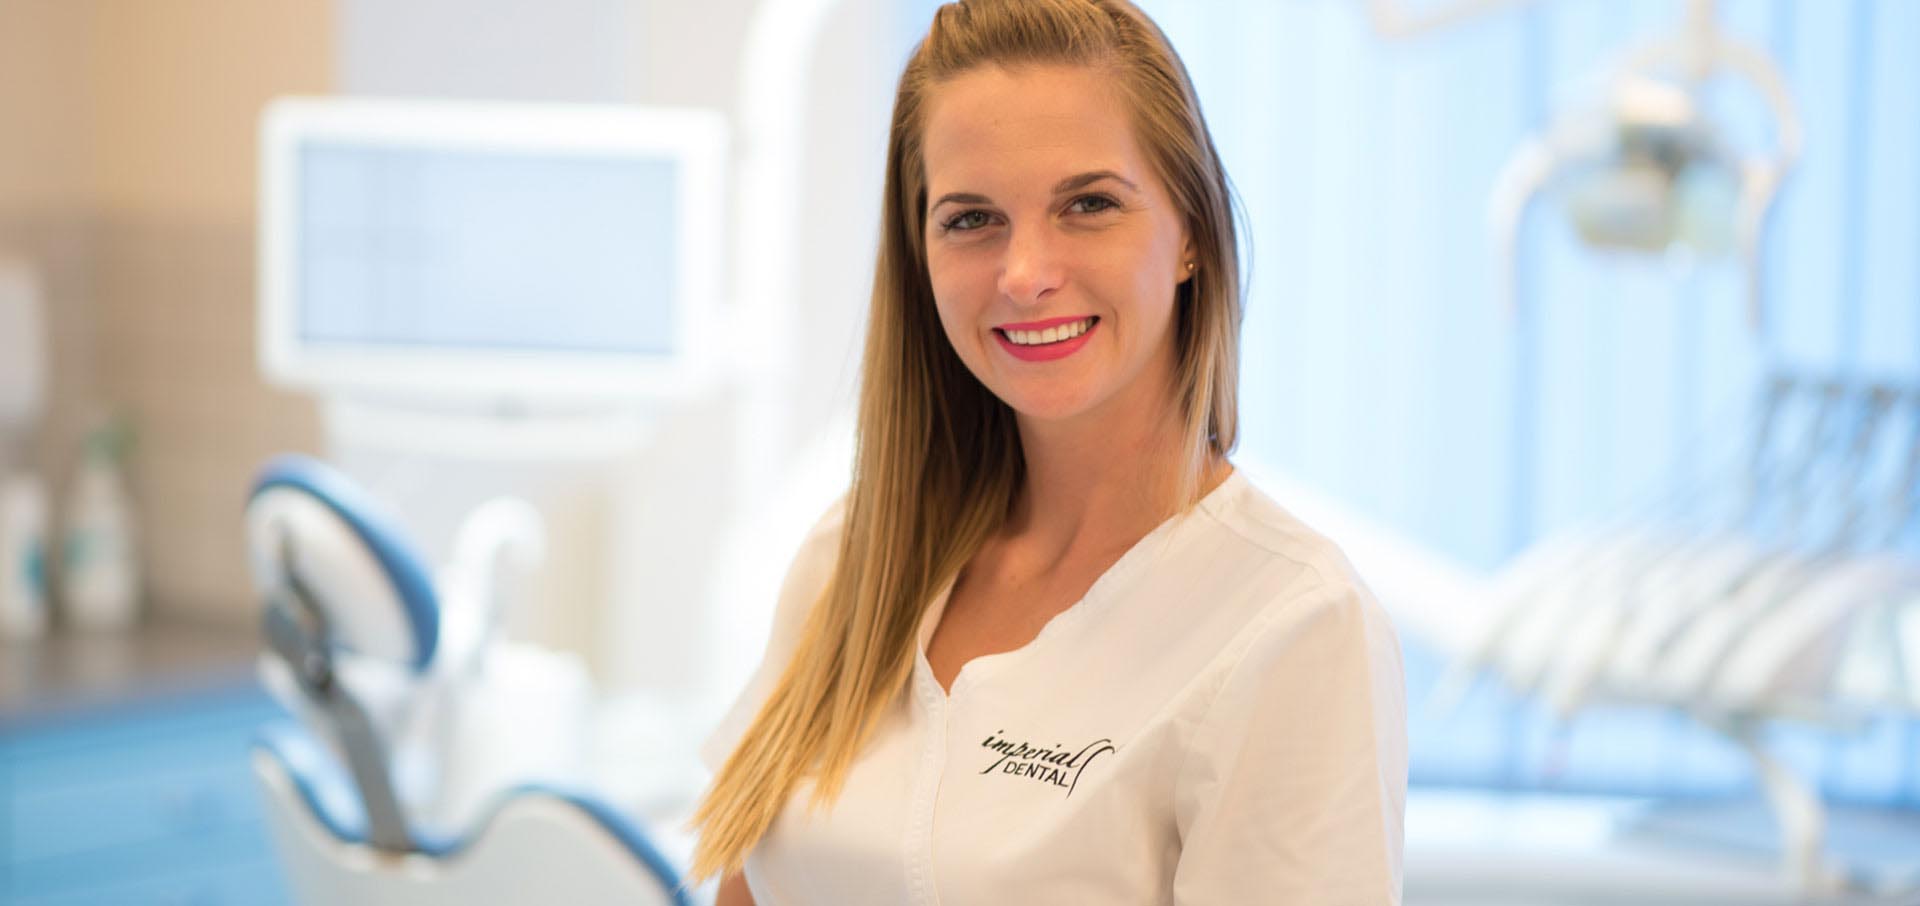 Imperial Dental Implantology and Aestethic Dentistry Centre